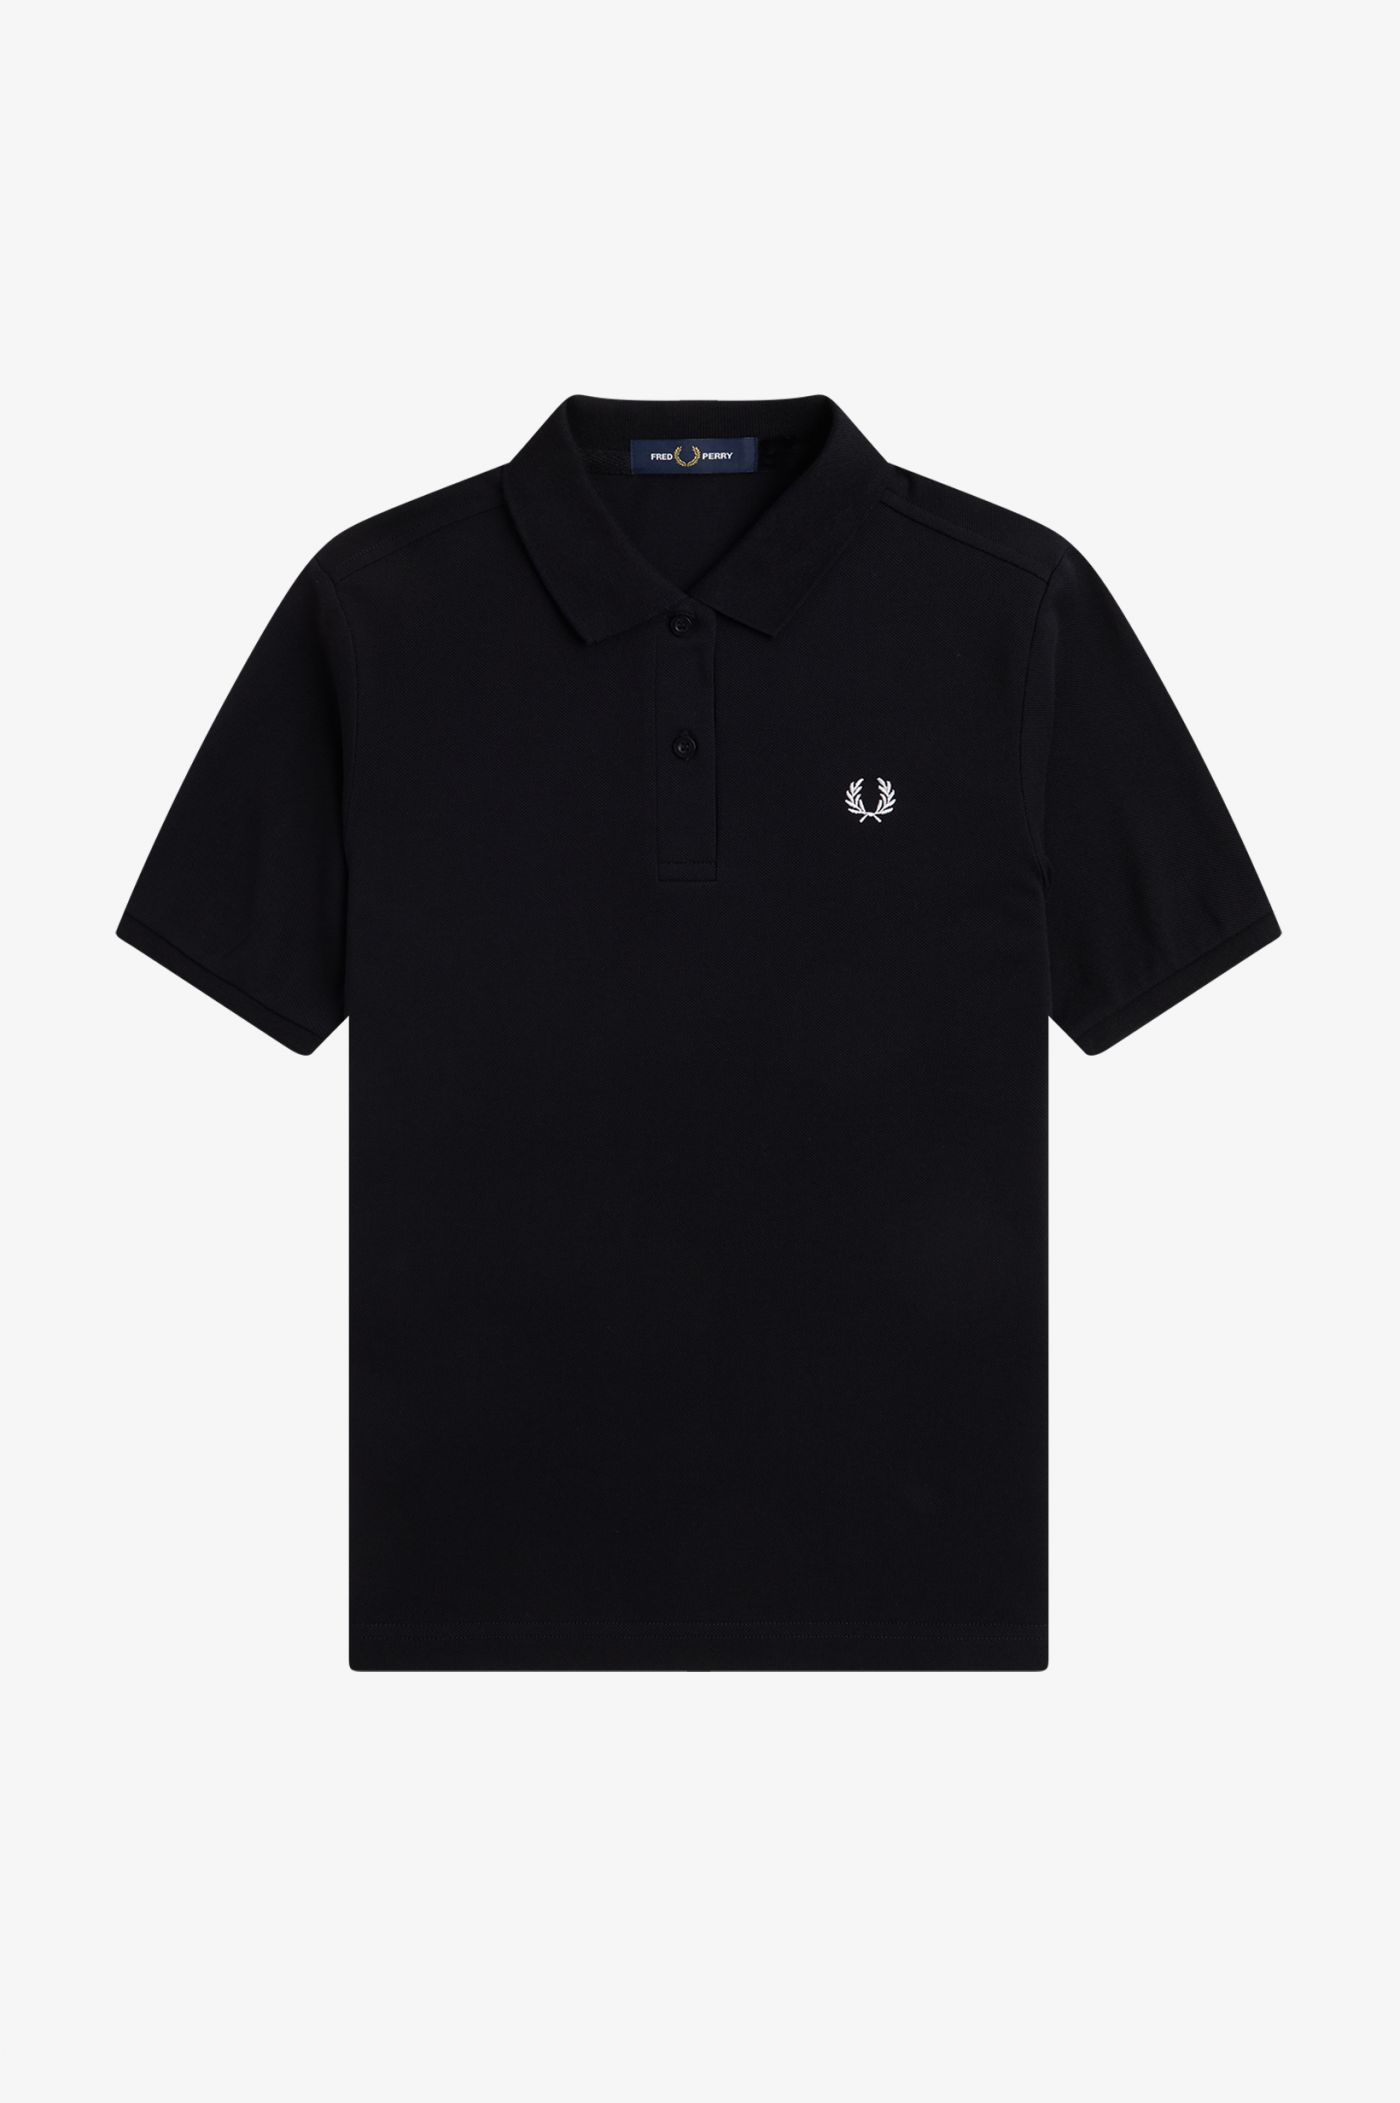 G6000 - Black | The Fred Perry Shirt | Women's Short & Long Sleeve